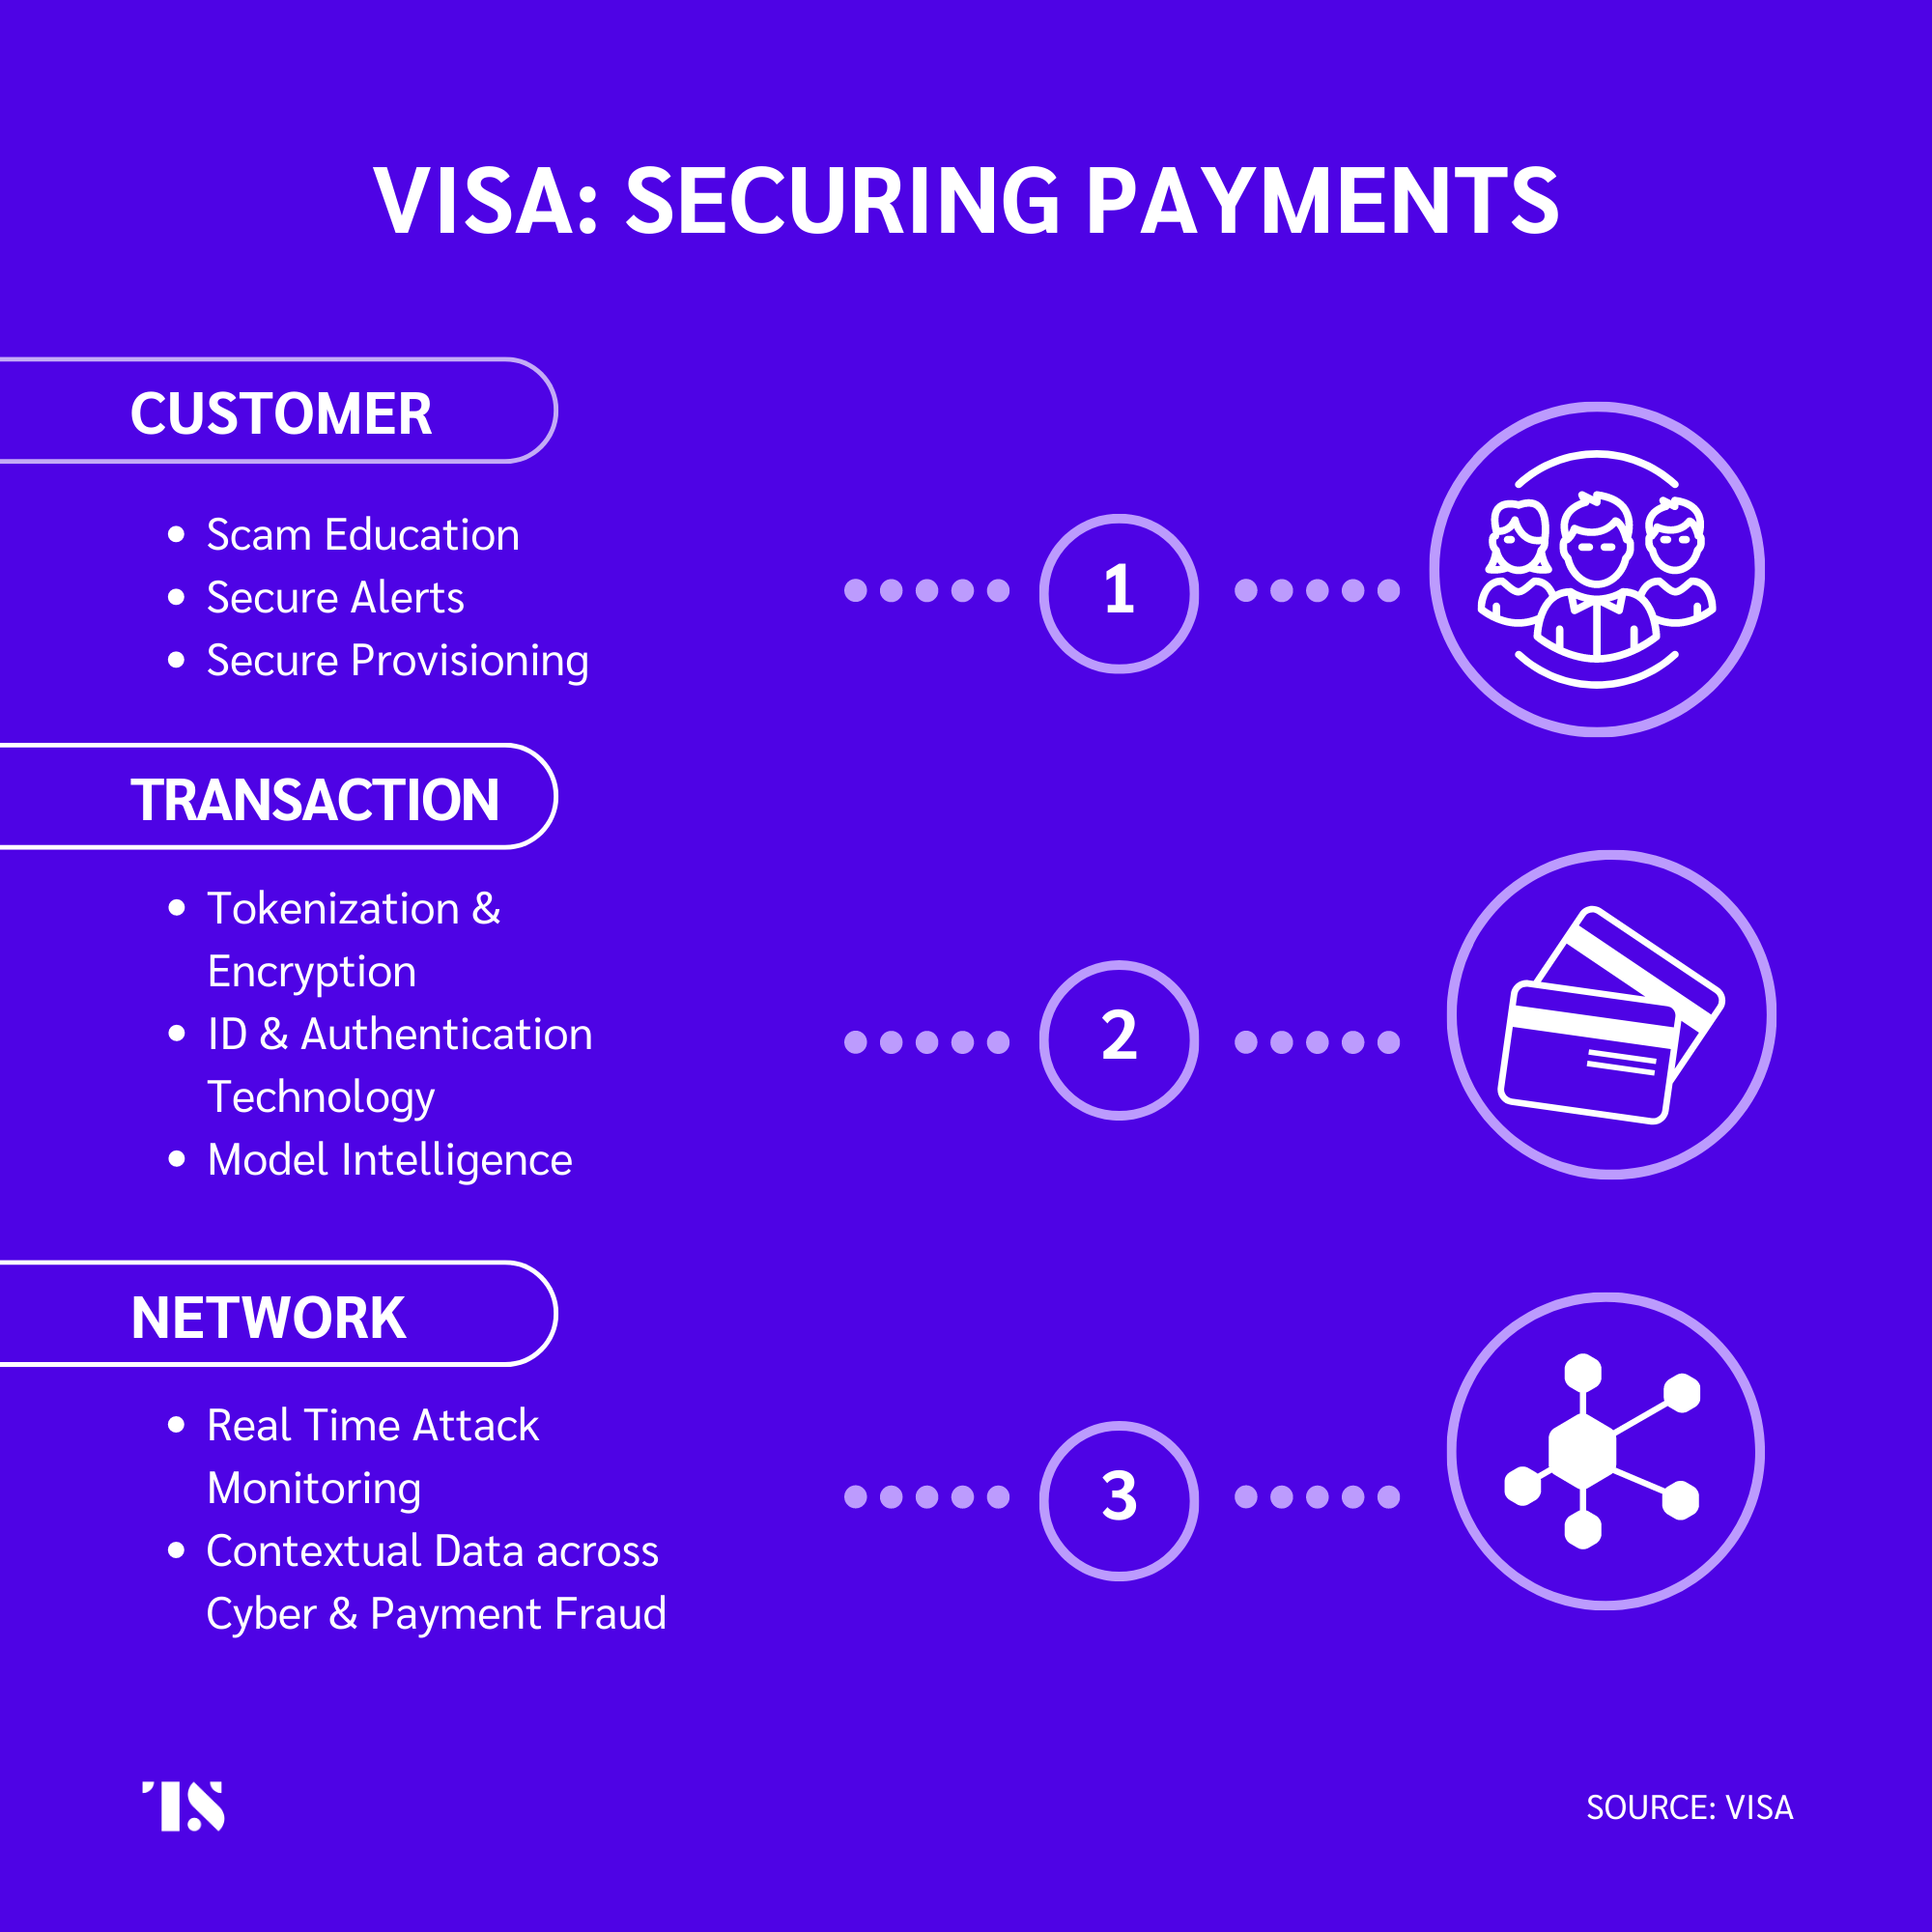 Visa's three pronged strategy based on customers, transactions and the network. 